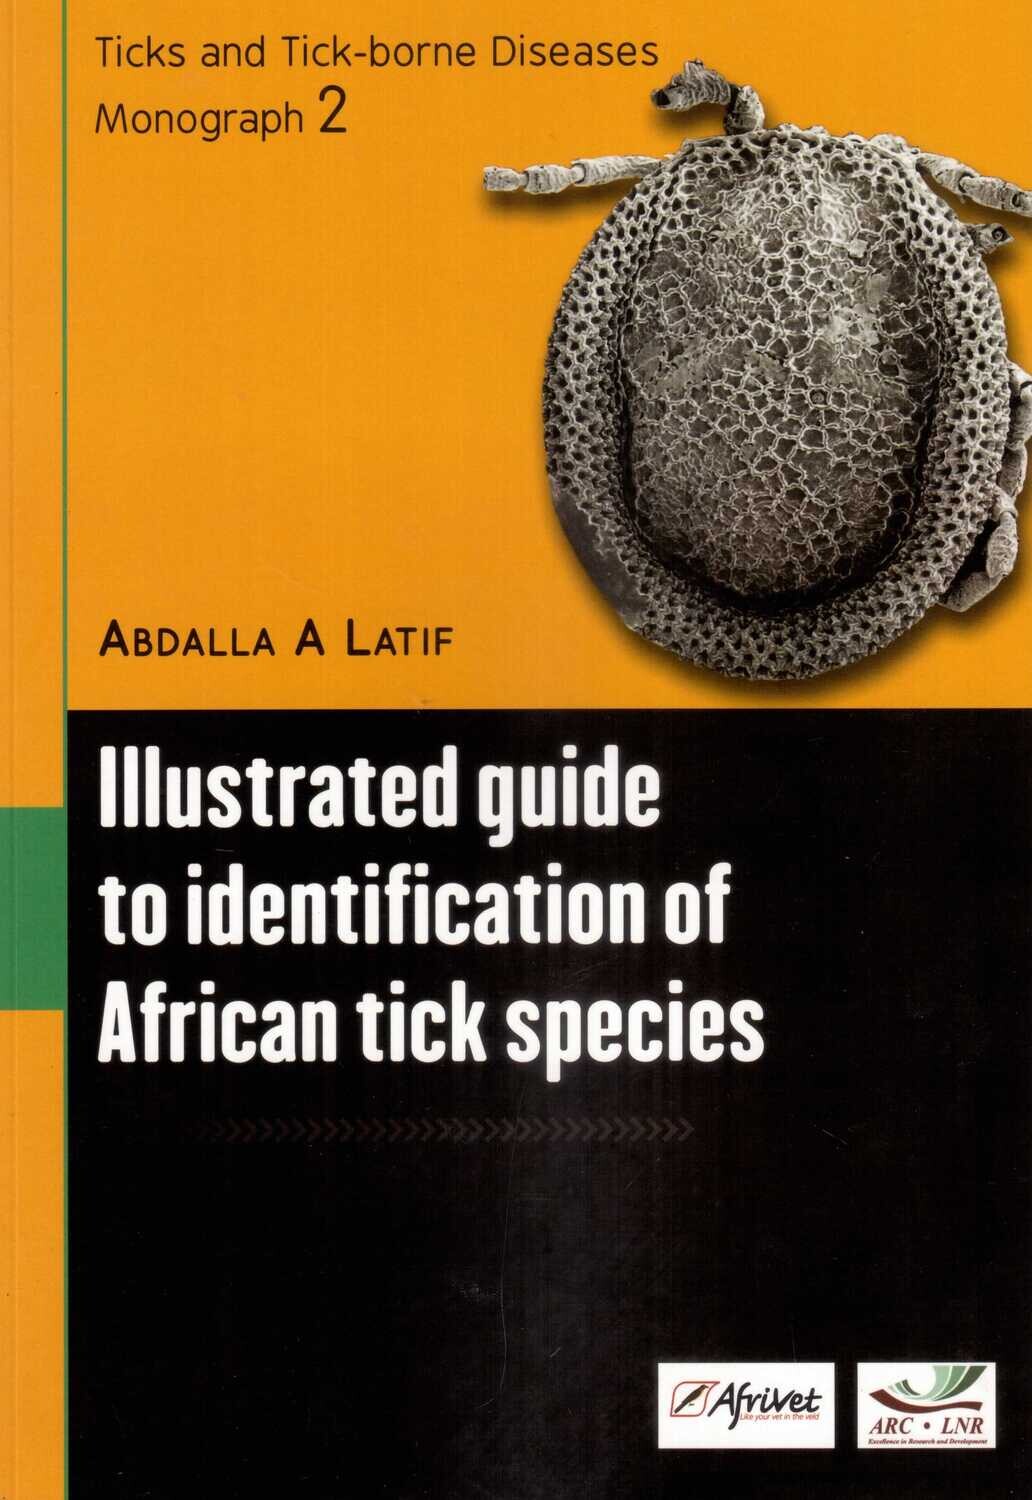 Illustrated guide to identification of African tick species